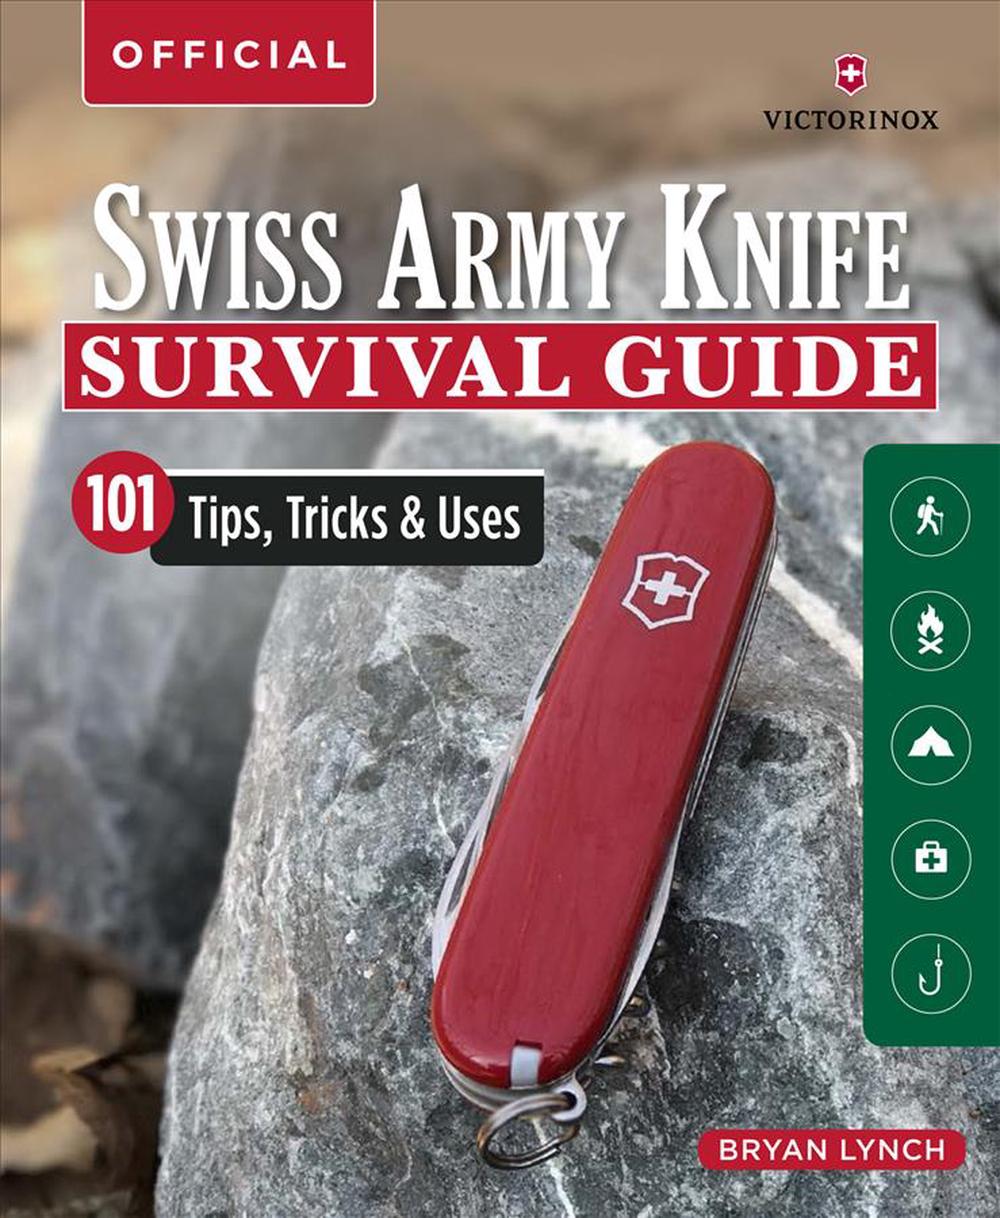 Victorinox Swiss Army Knife Camping & Outdoor Survival Guide by Bryan  Lynch, Paperback, 9781565239951